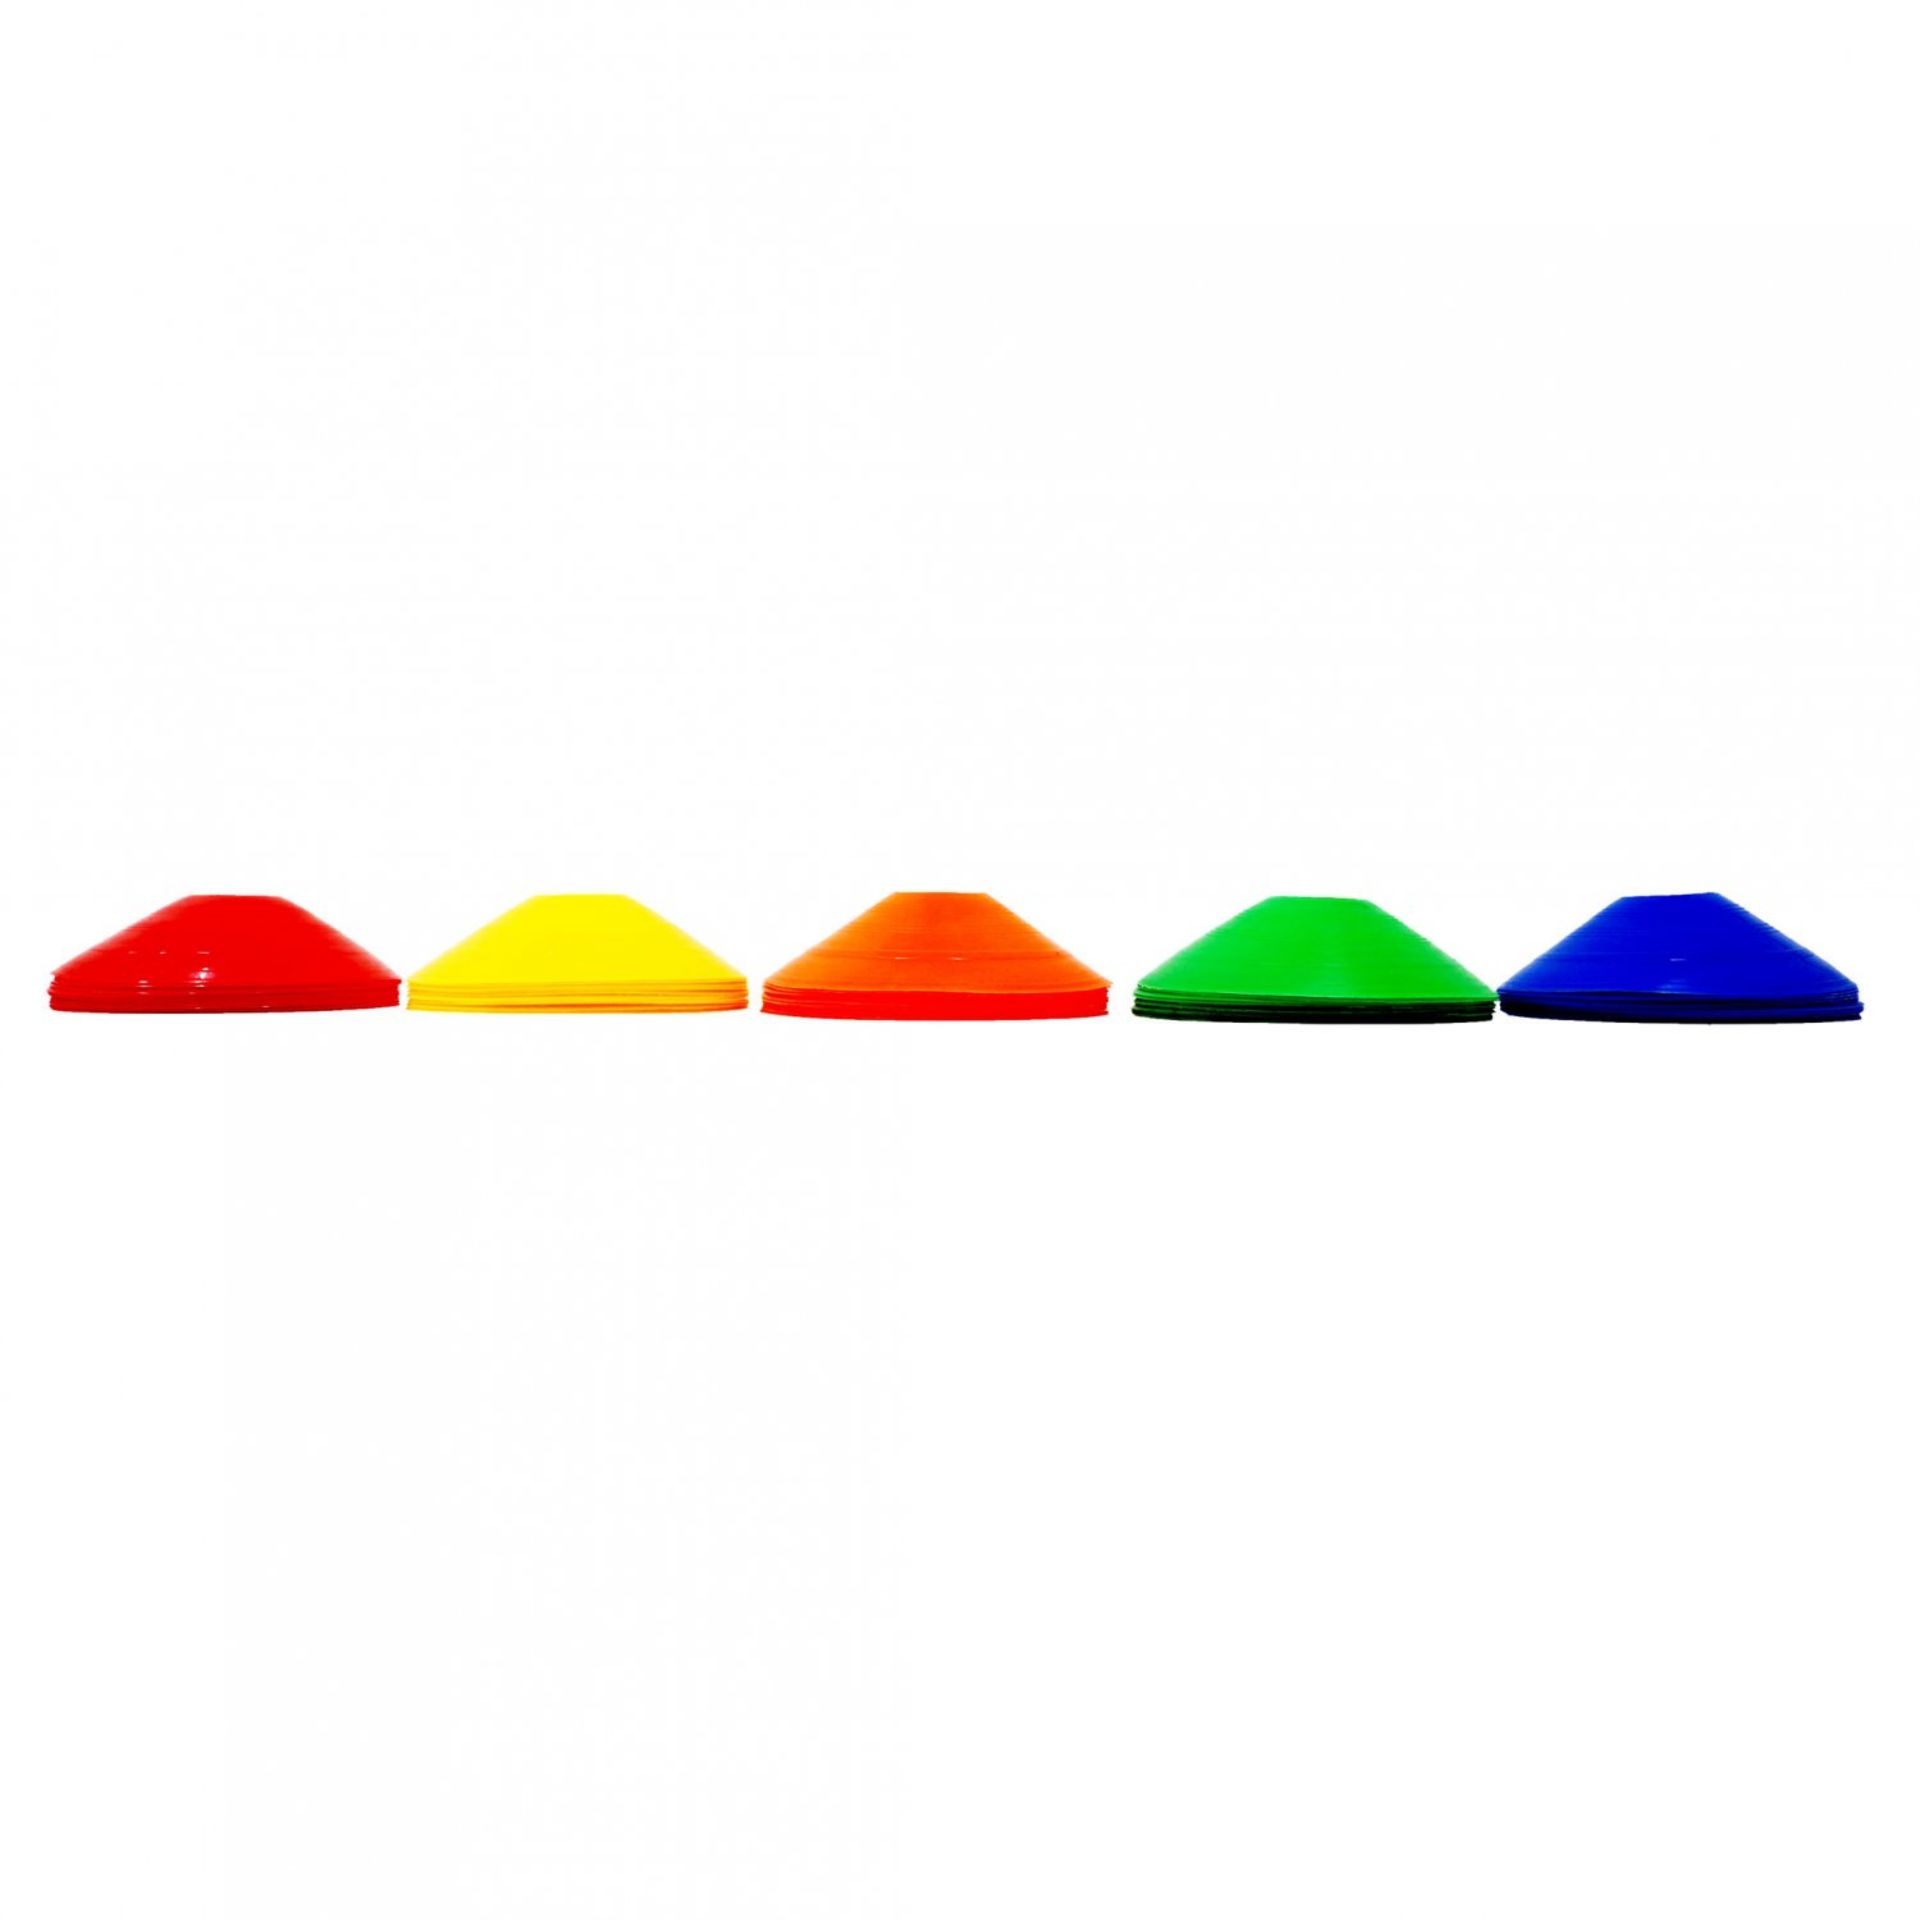 (RU315) 50x Multi Coloured Sports Training Markers Discs Cones w/ Stand This set of 50 tra... - Image 2 of 2